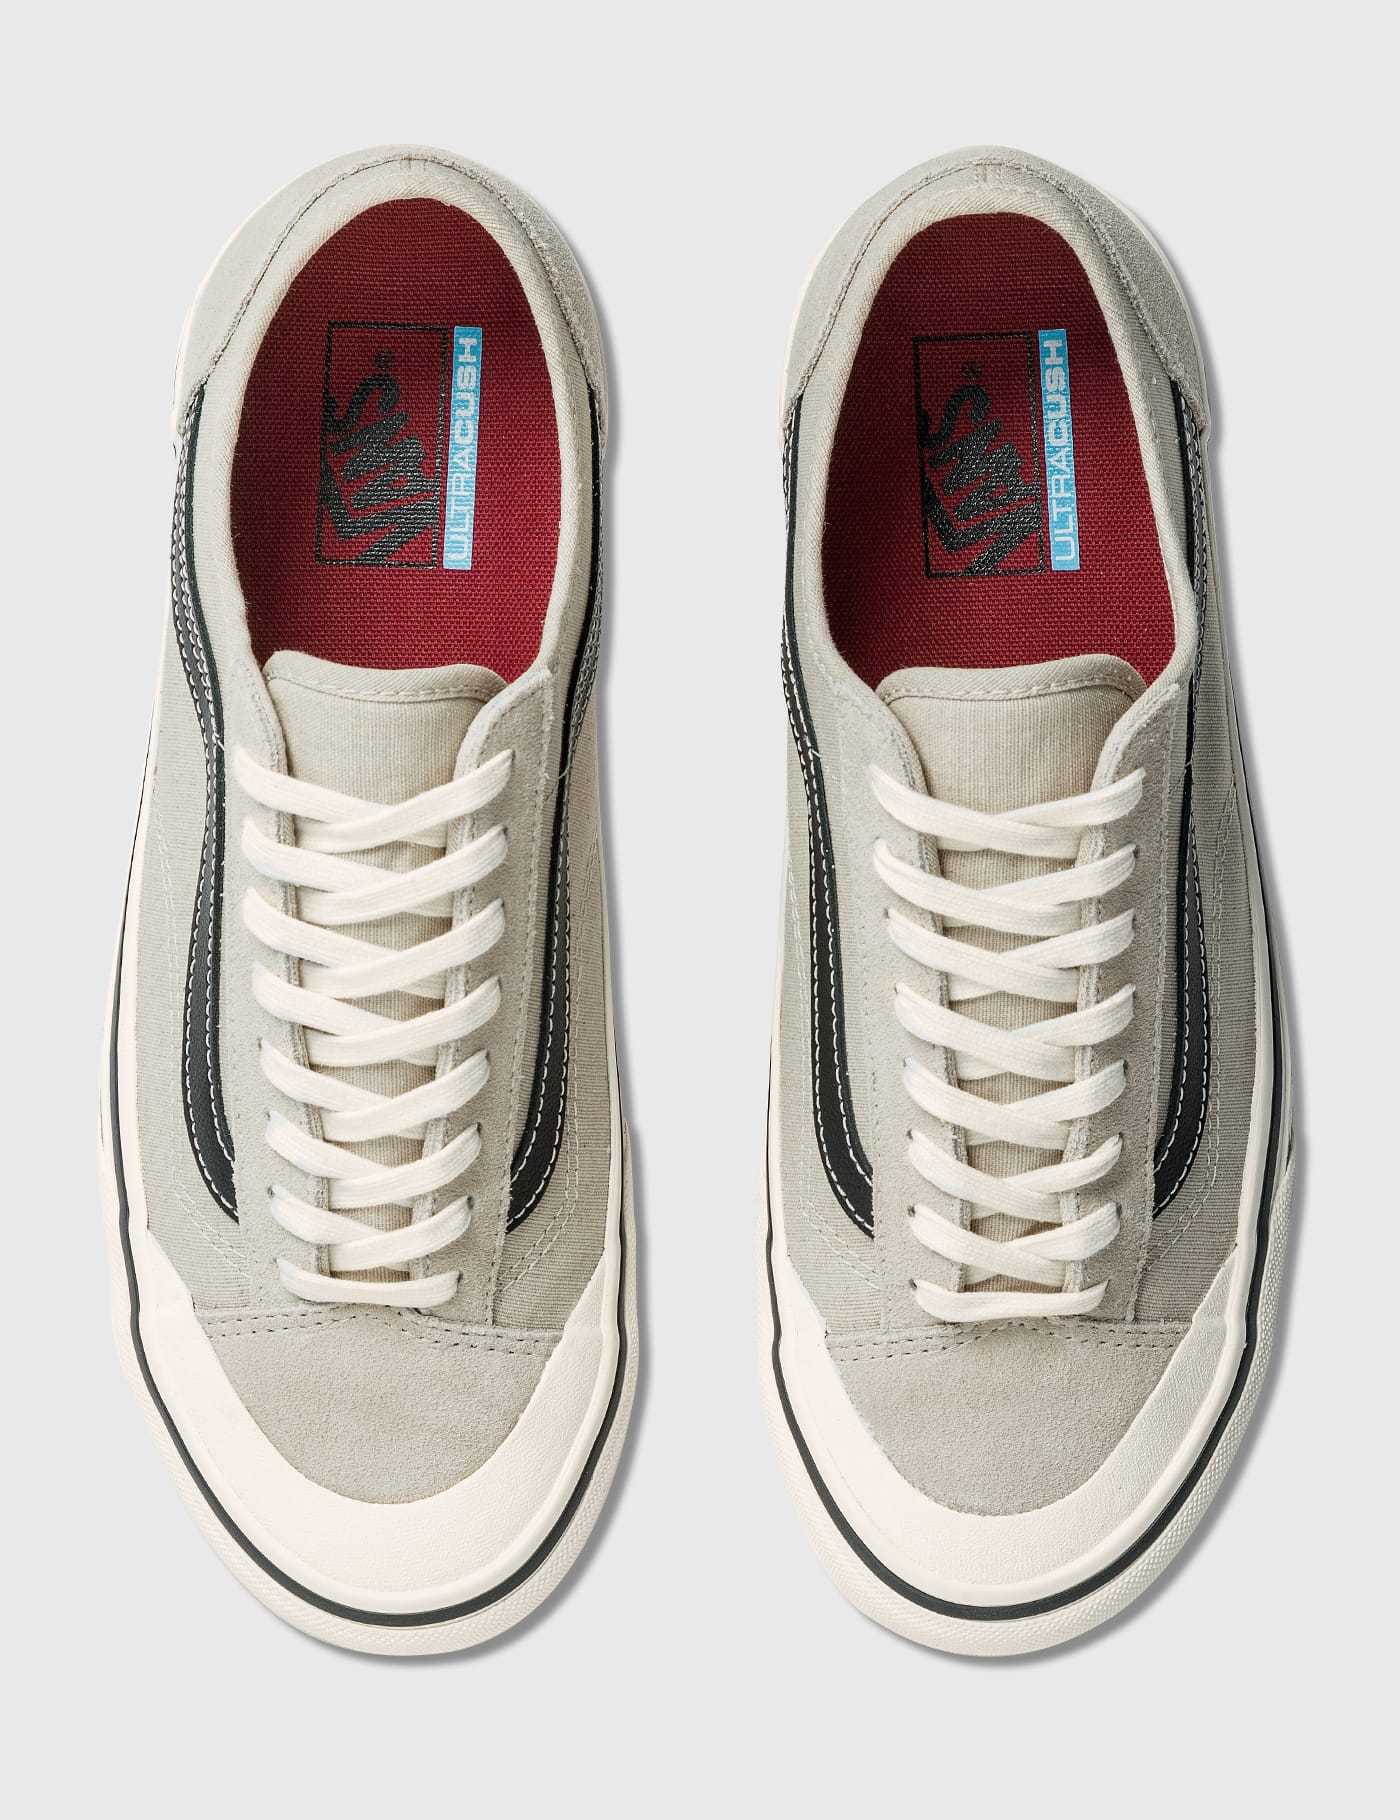 Vans - Style 36 Decon SF | HBX - Globally Curated Fashion and Lifestyle by  Hypebeast